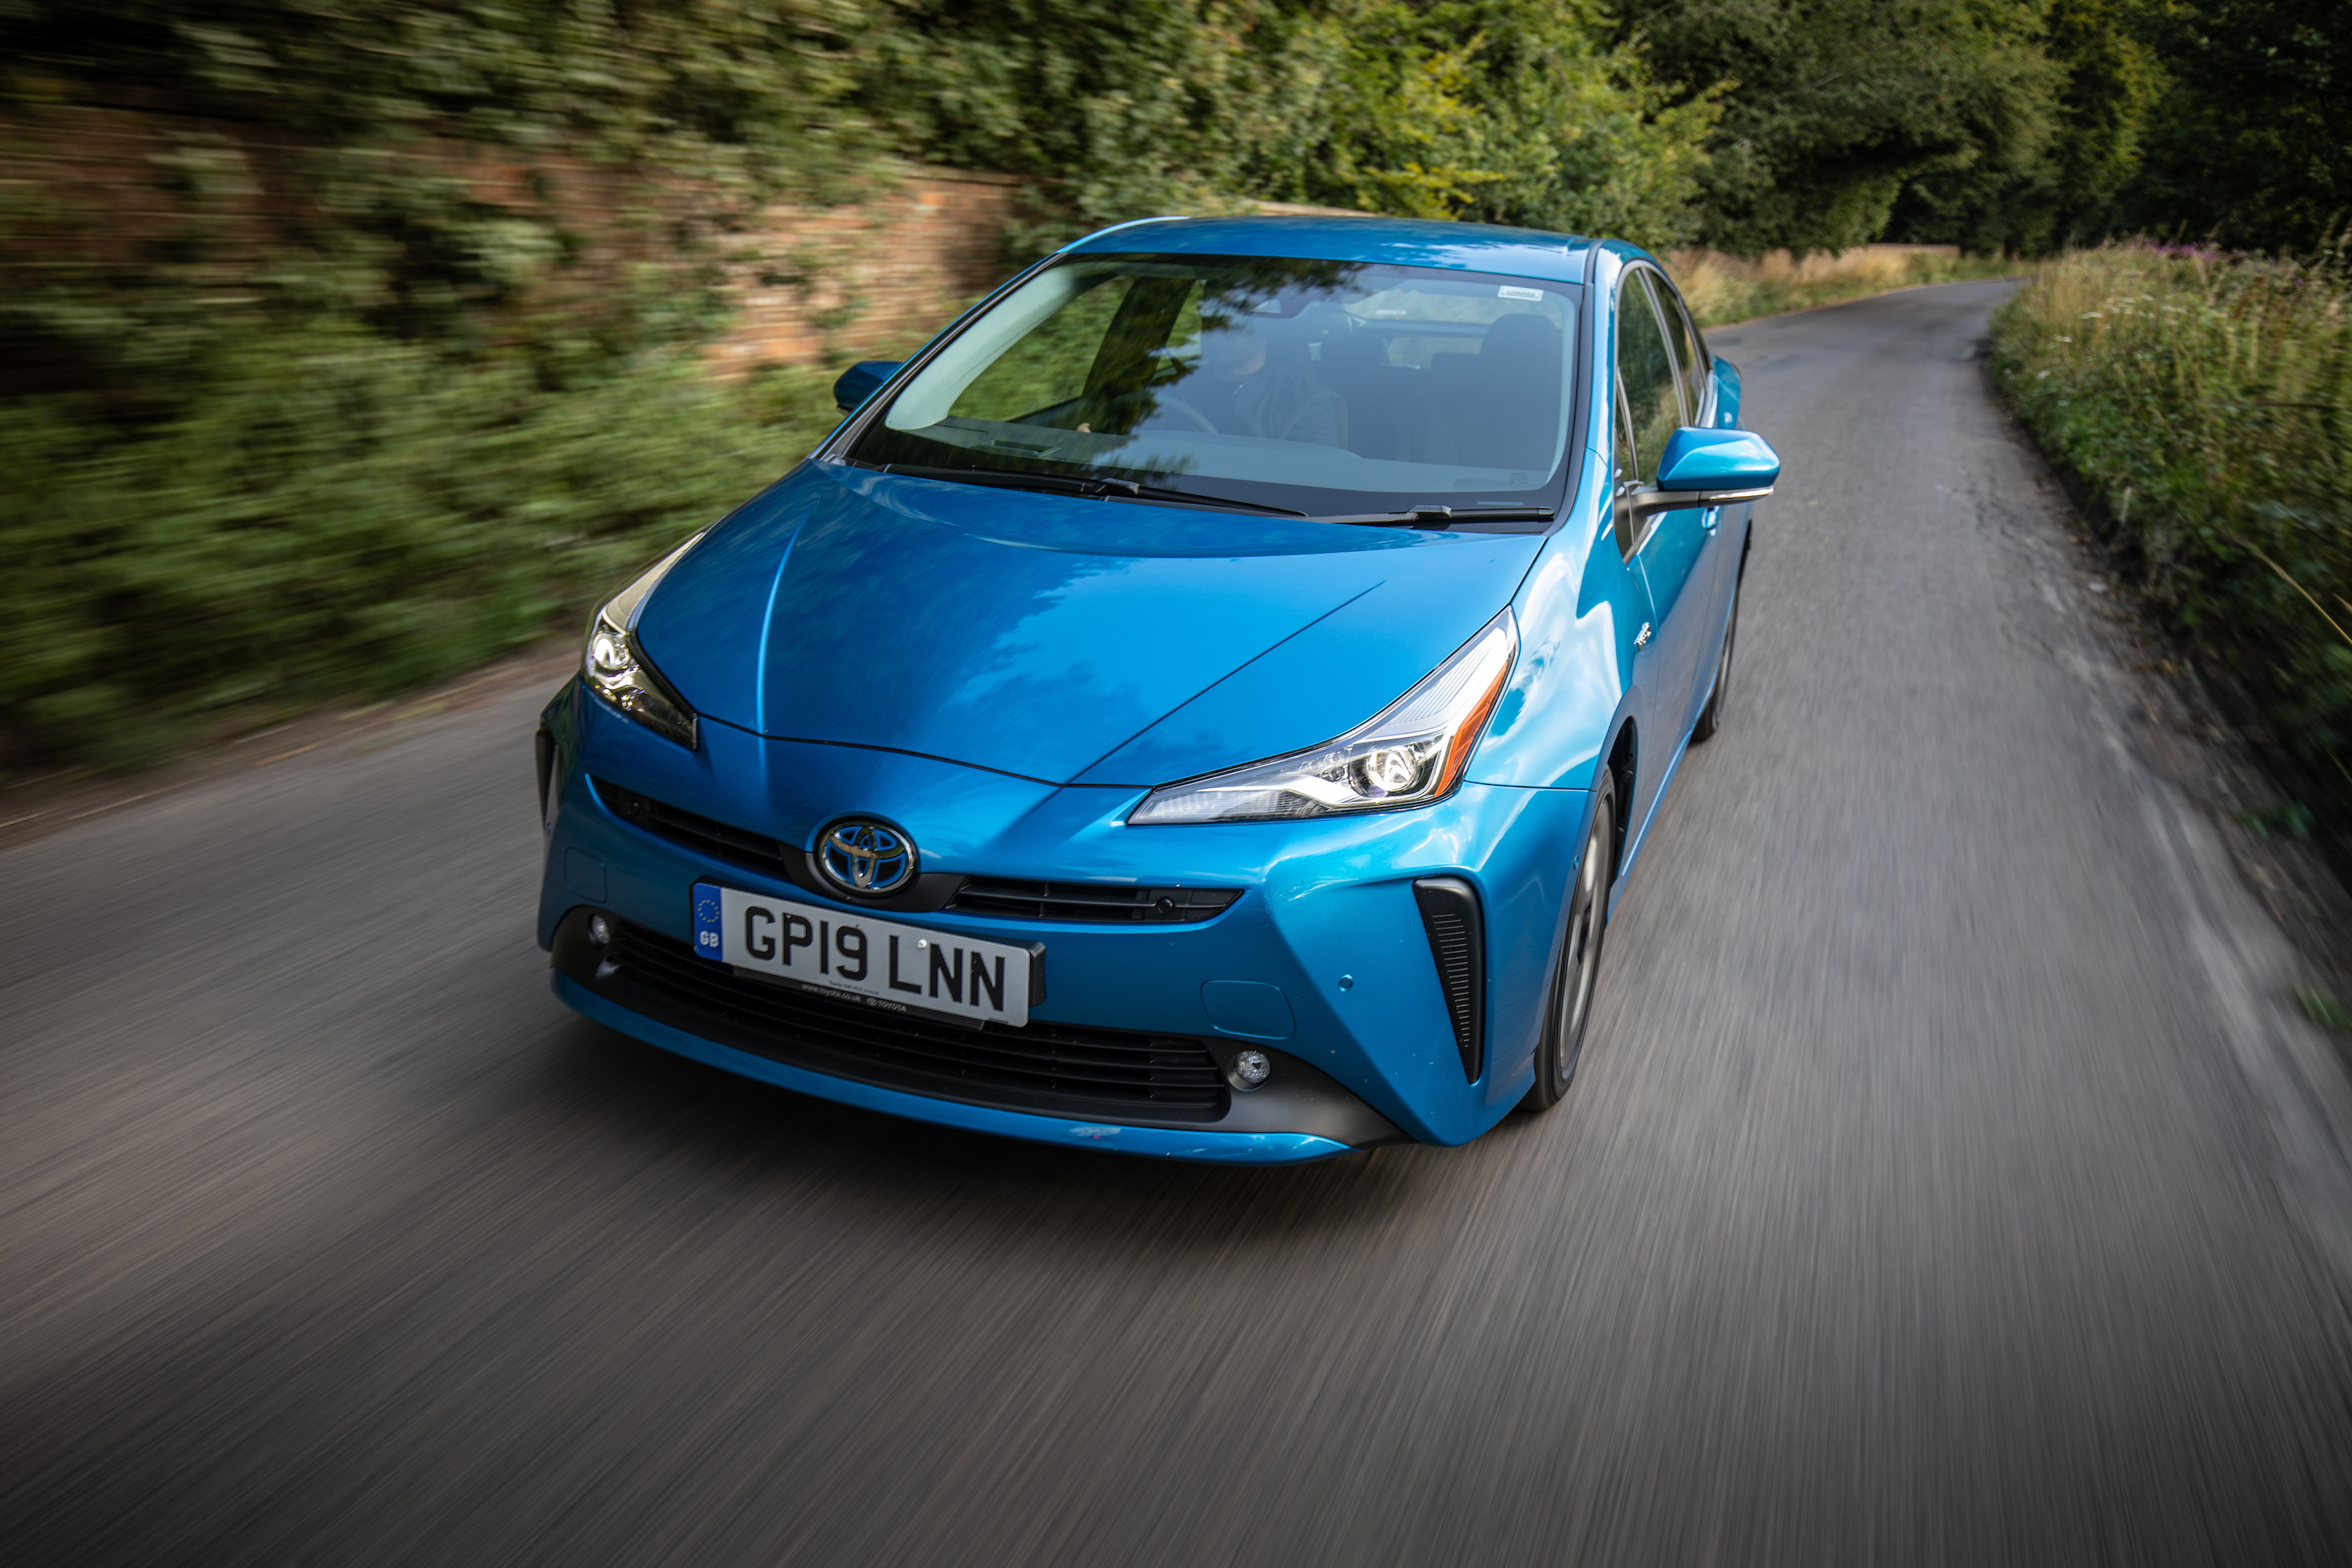 To Prius has been a go-to hybrid option for many years